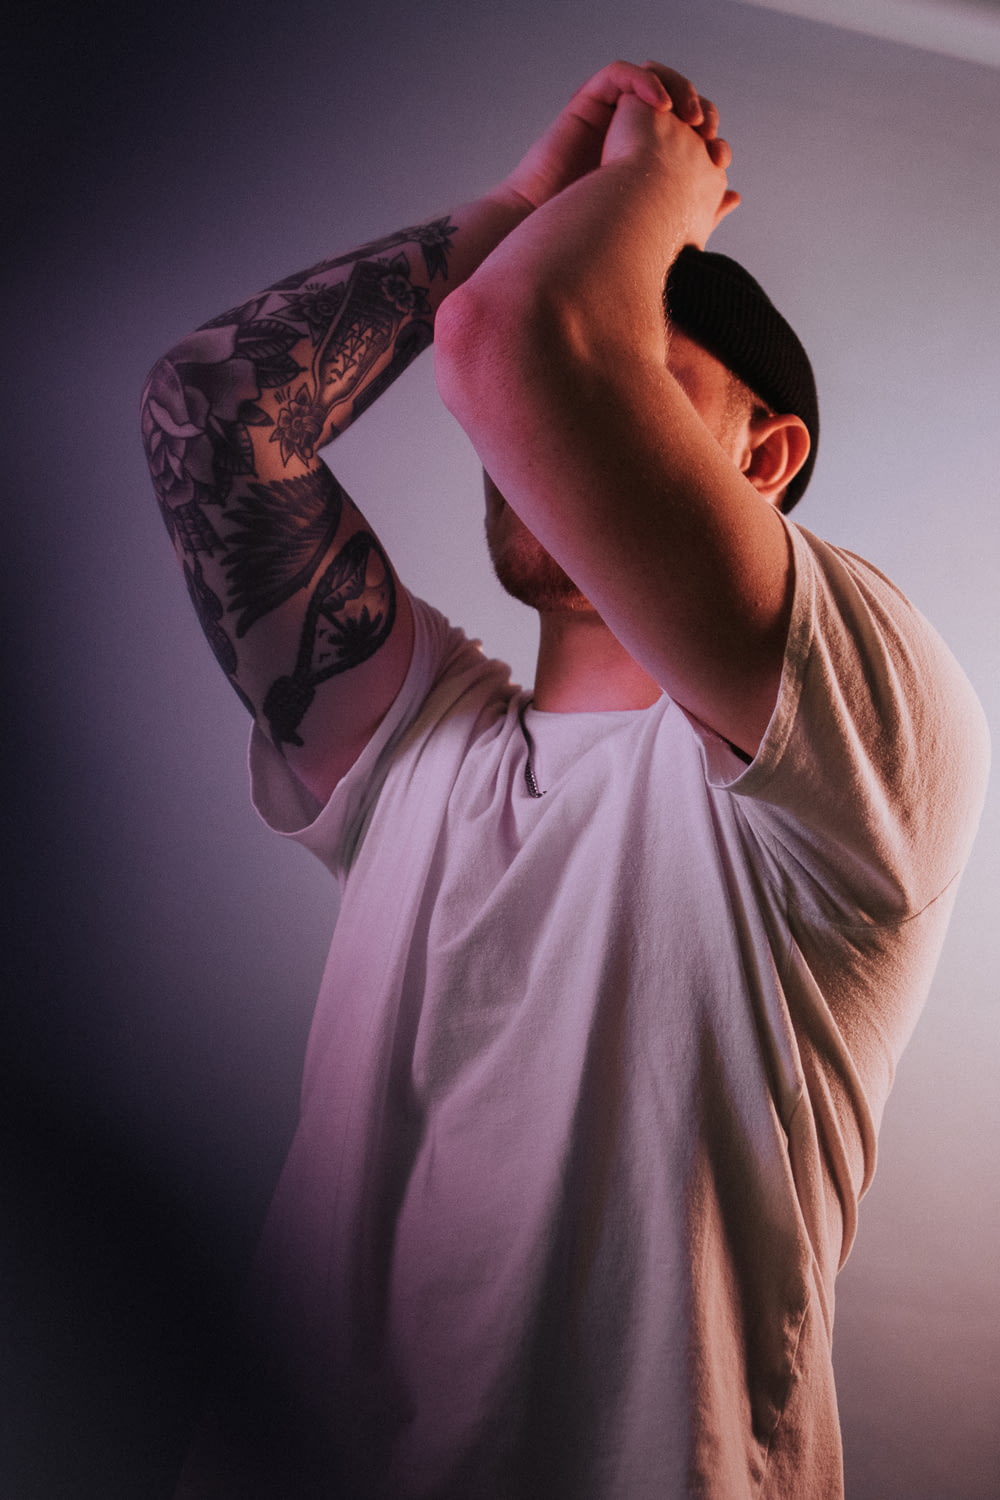 man in white t-shirt with black and red floral tattoo on his right arm